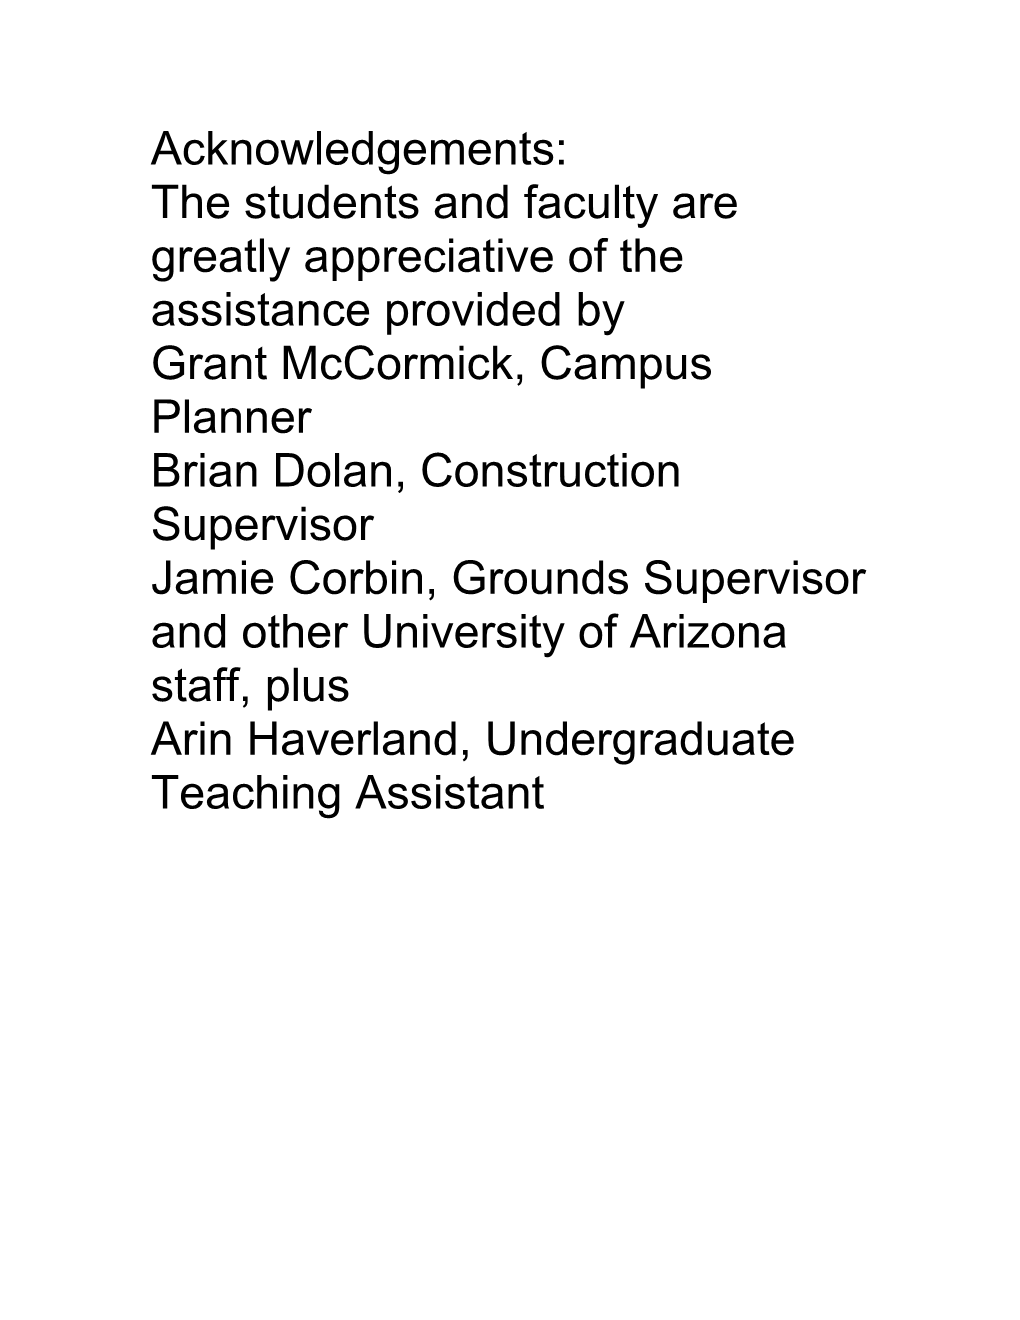 Student Papers on Water Harvesting at the University of Arizona Campus